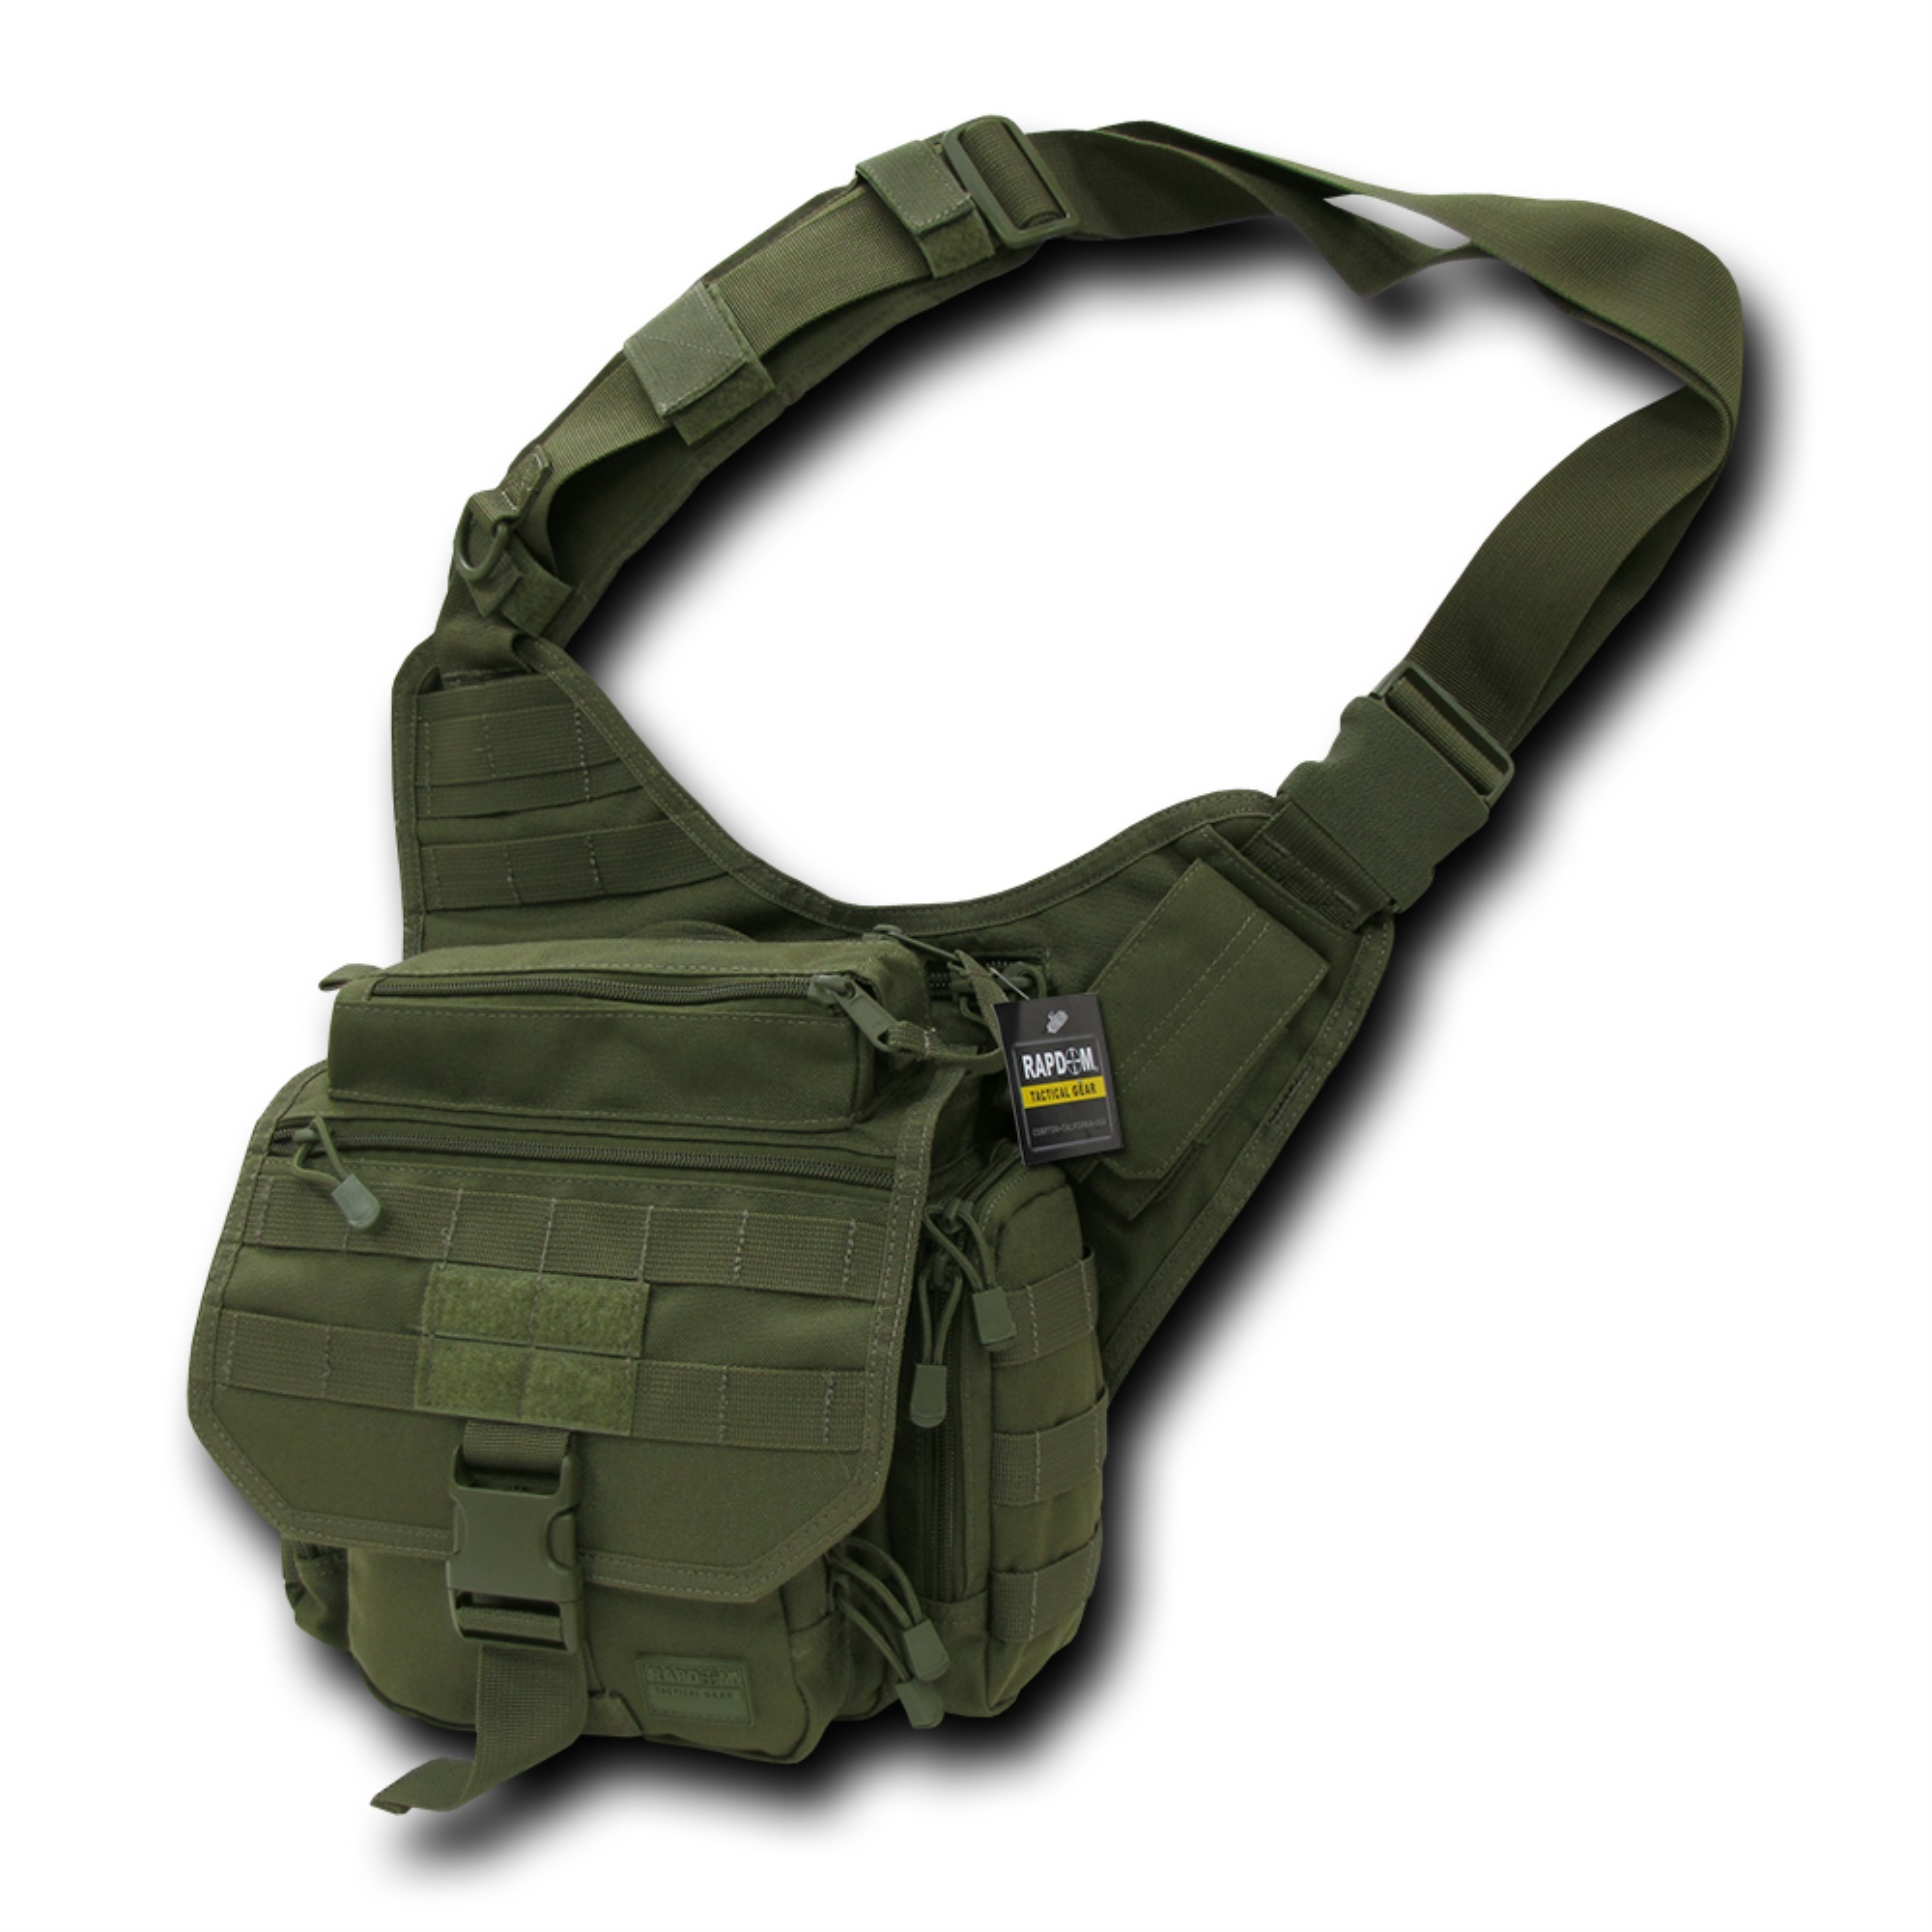 Rapid Dominance Tactical Field Bag, Olive Drab (pack of 2)